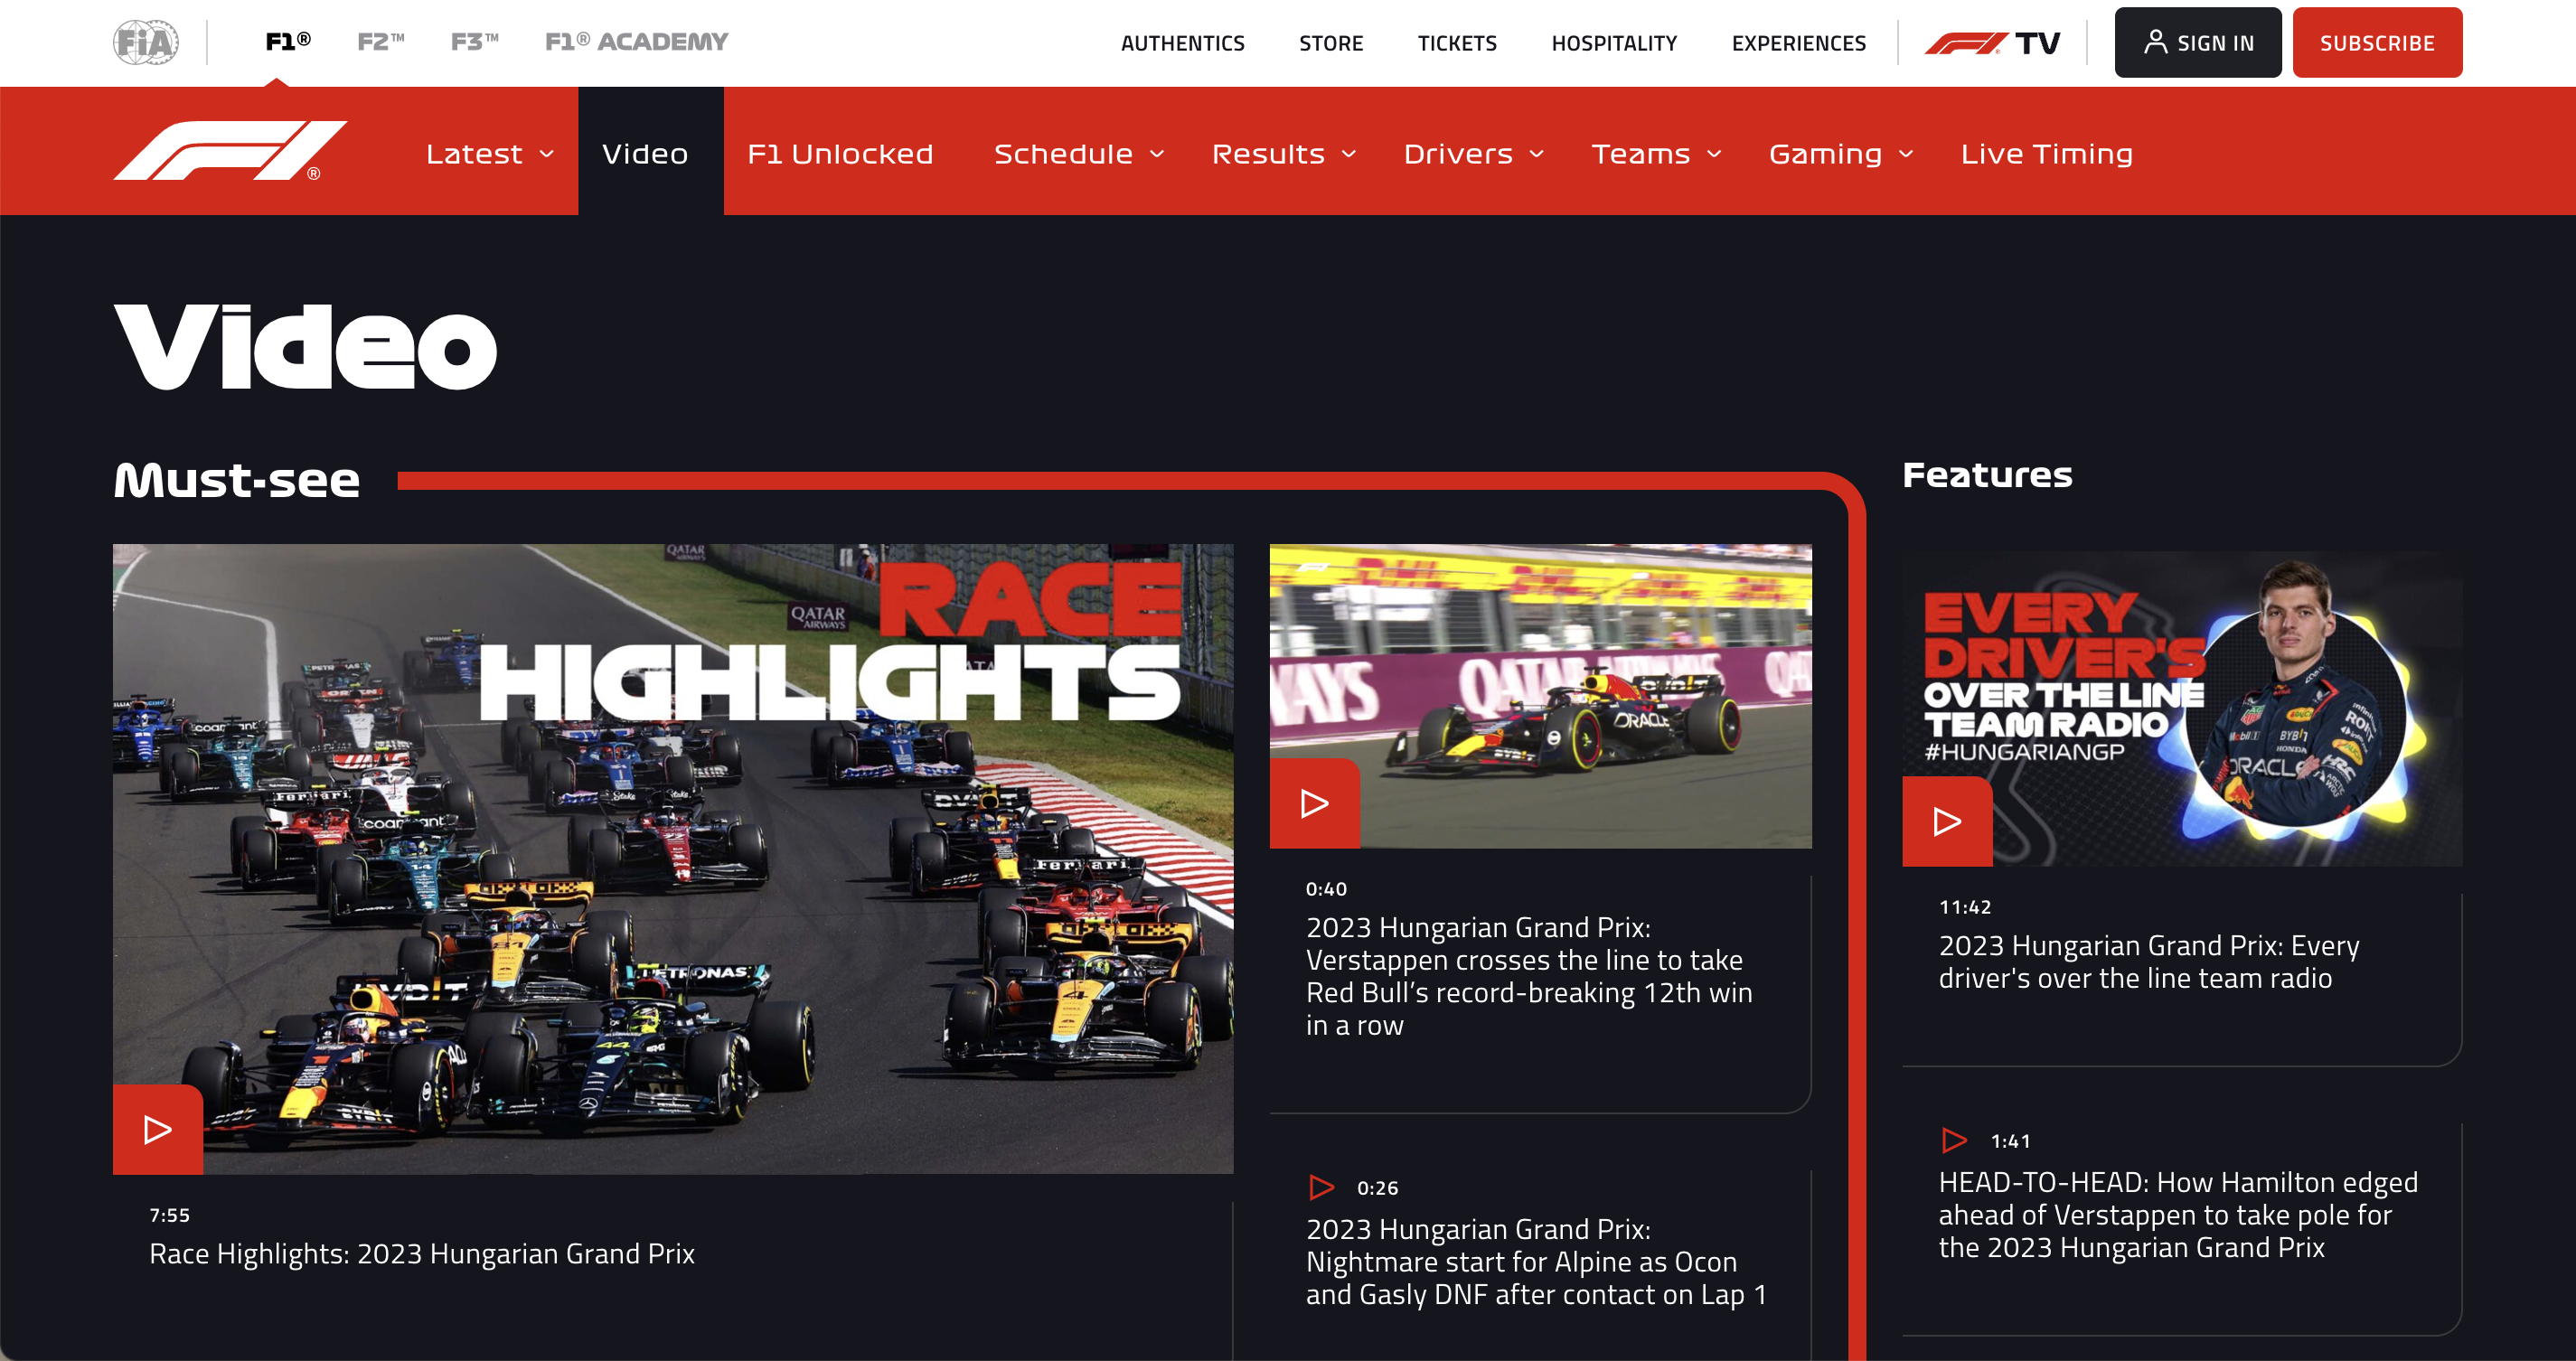 Screenshot from the F1 motorsport website showing their VIDEOS page which shows various video tiles and titles.